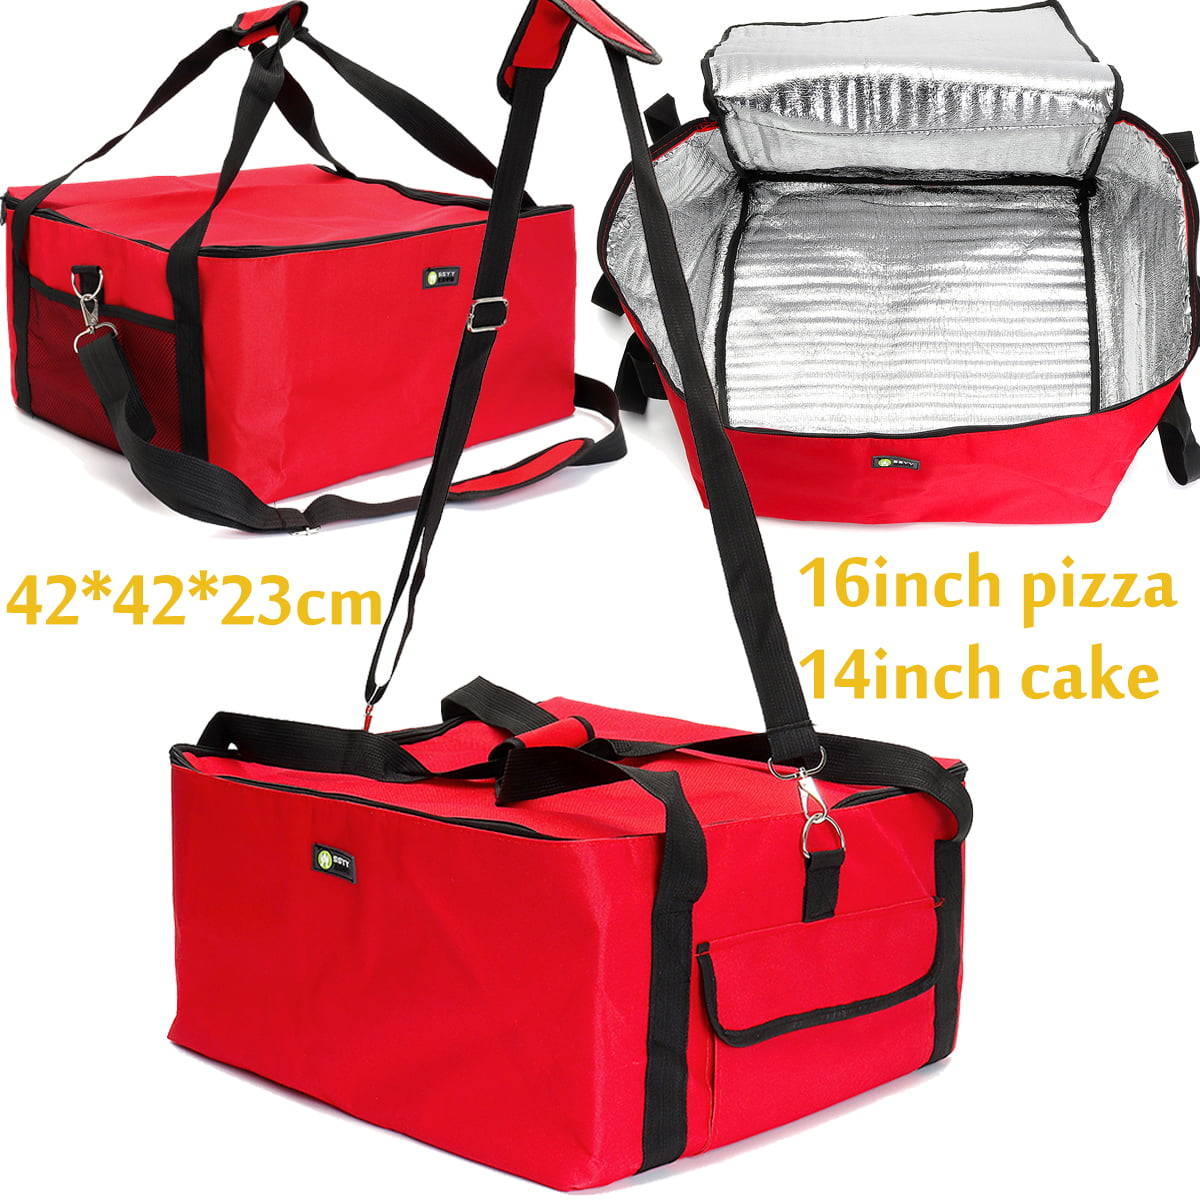 16'' Size 42*42*23cm Pizza Food Delivery Bag Insulated Storage Holder 